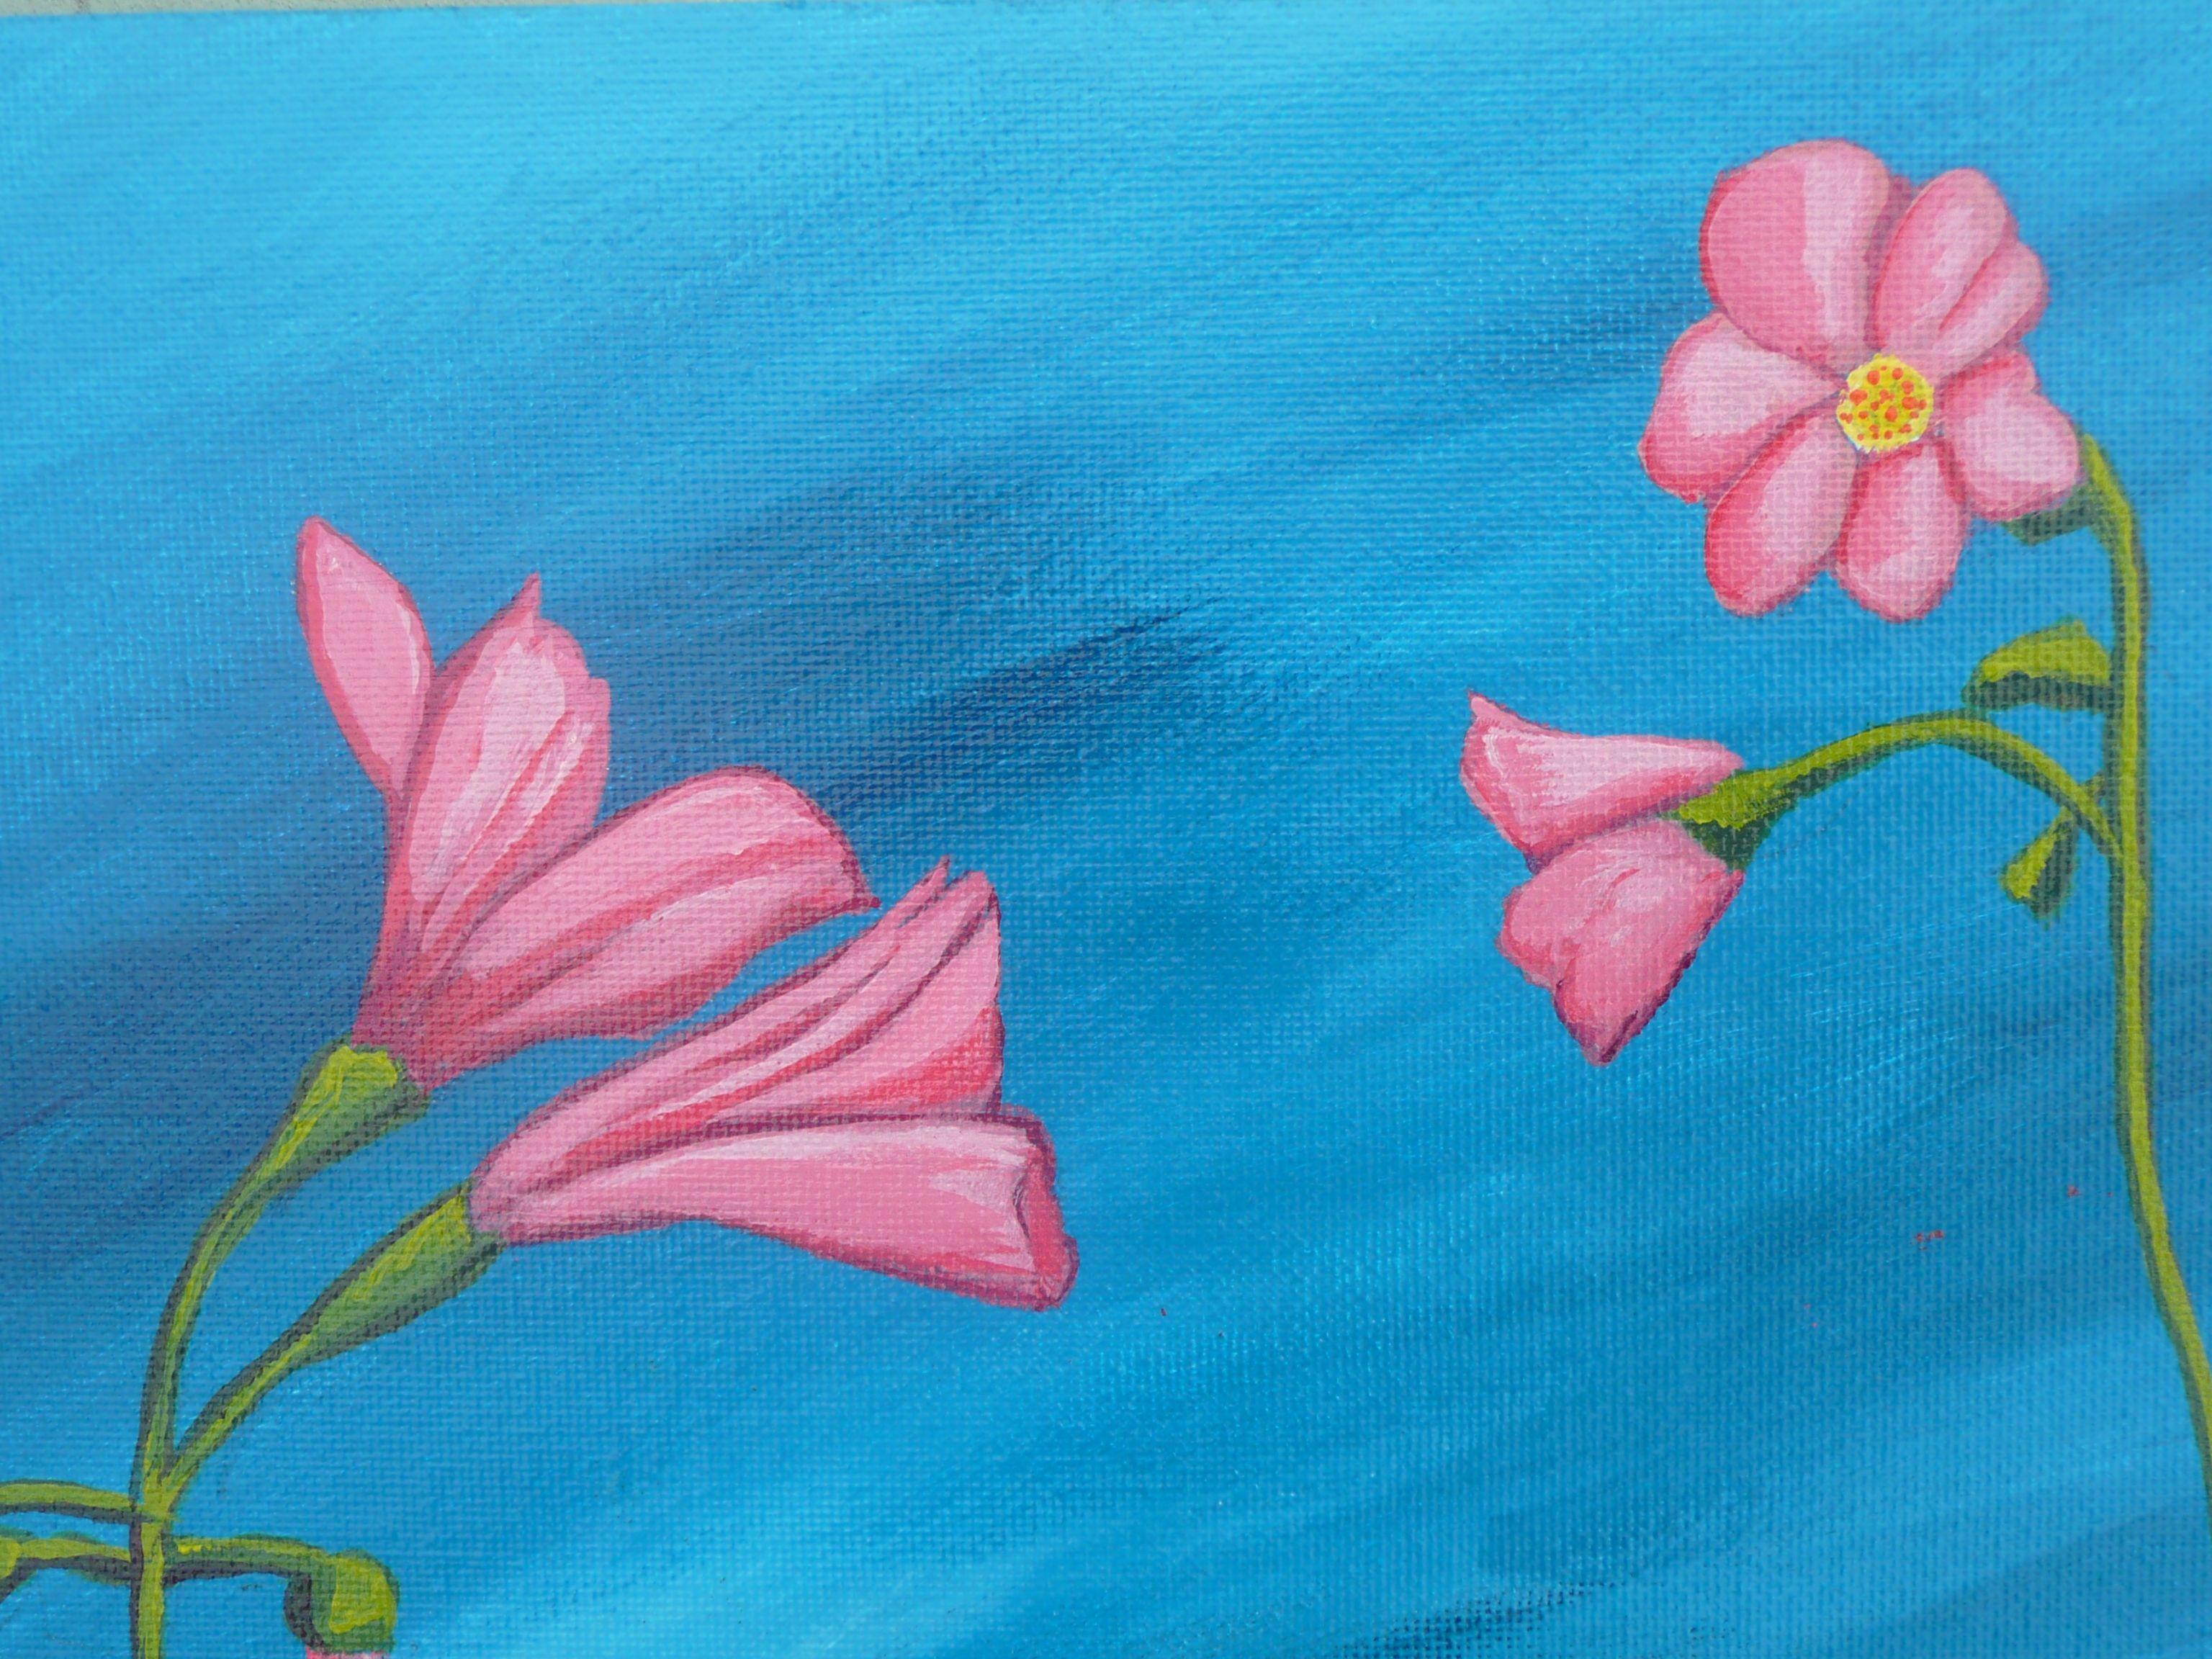 This is a painting of a four leaf clover plant that I have growing on my roof garden. For a very short time each year it has delicate pink flowers. This floral art has been created using professional grade acrylics on archival grade canvas. The flat